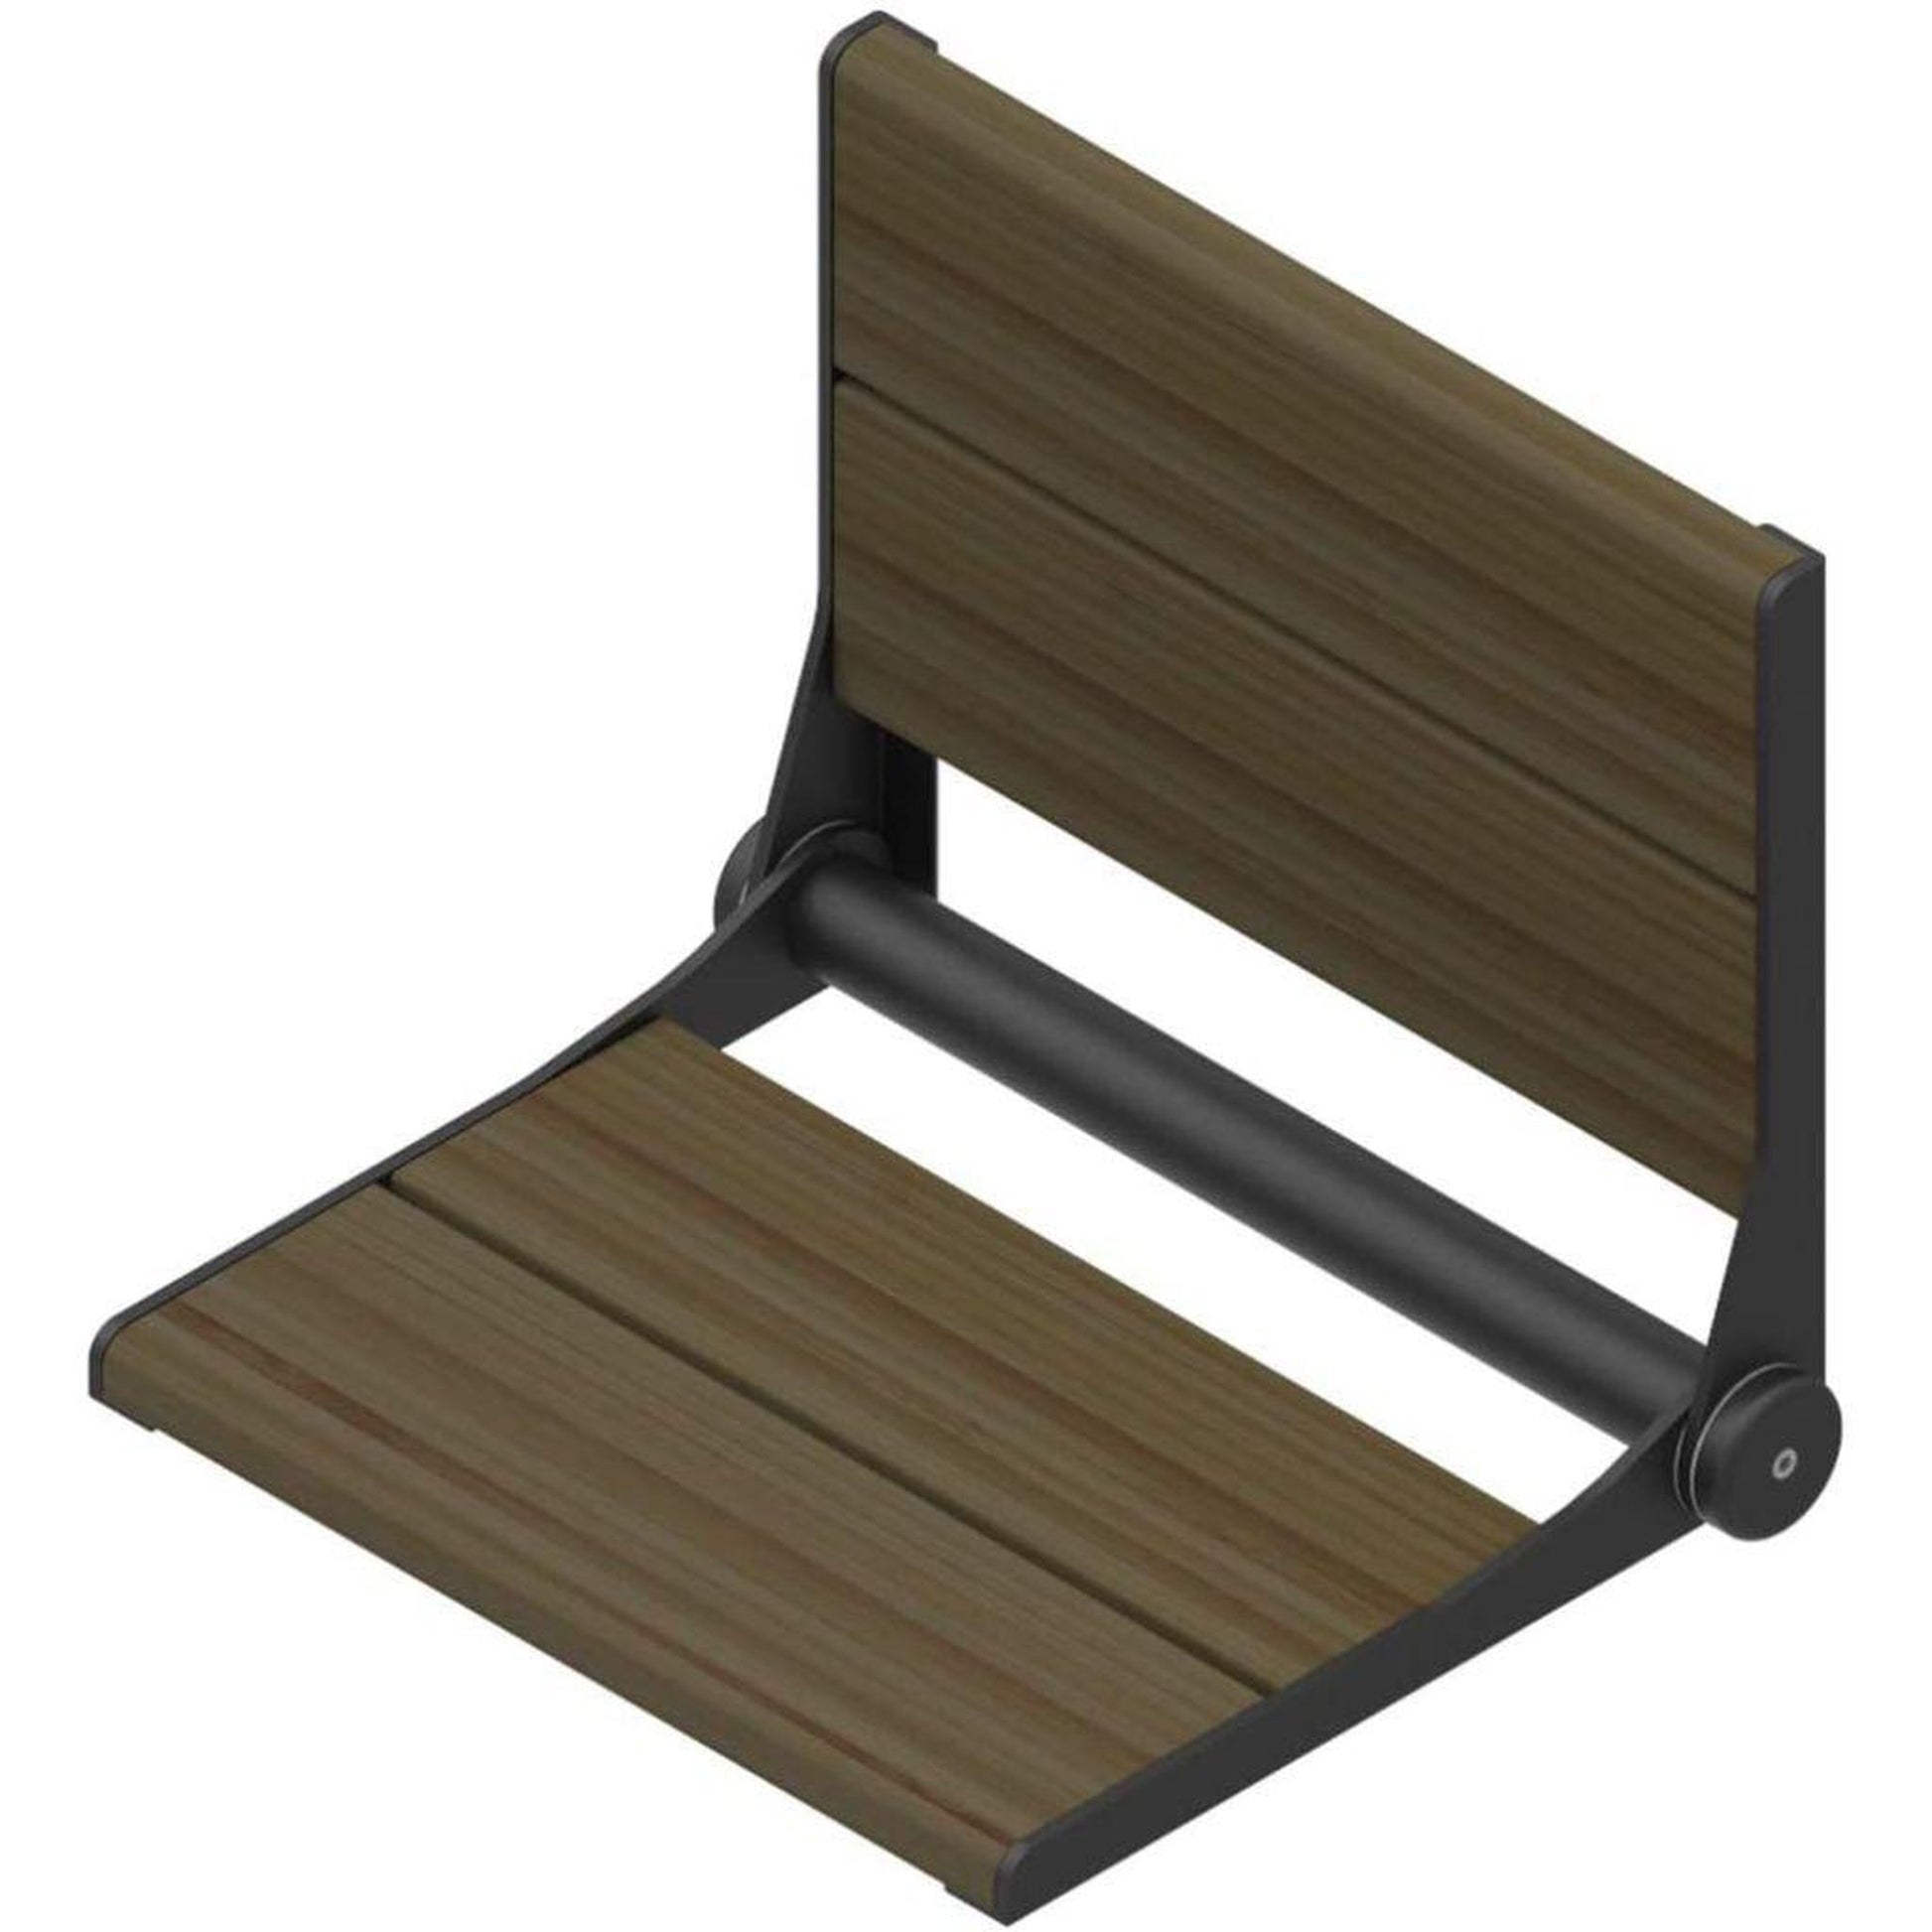 Invisia 26" Rectangle Ash Stained Bamboo Wall-Mounted SerenaSeat Fold Down Shower Seat With Matte Black Frame